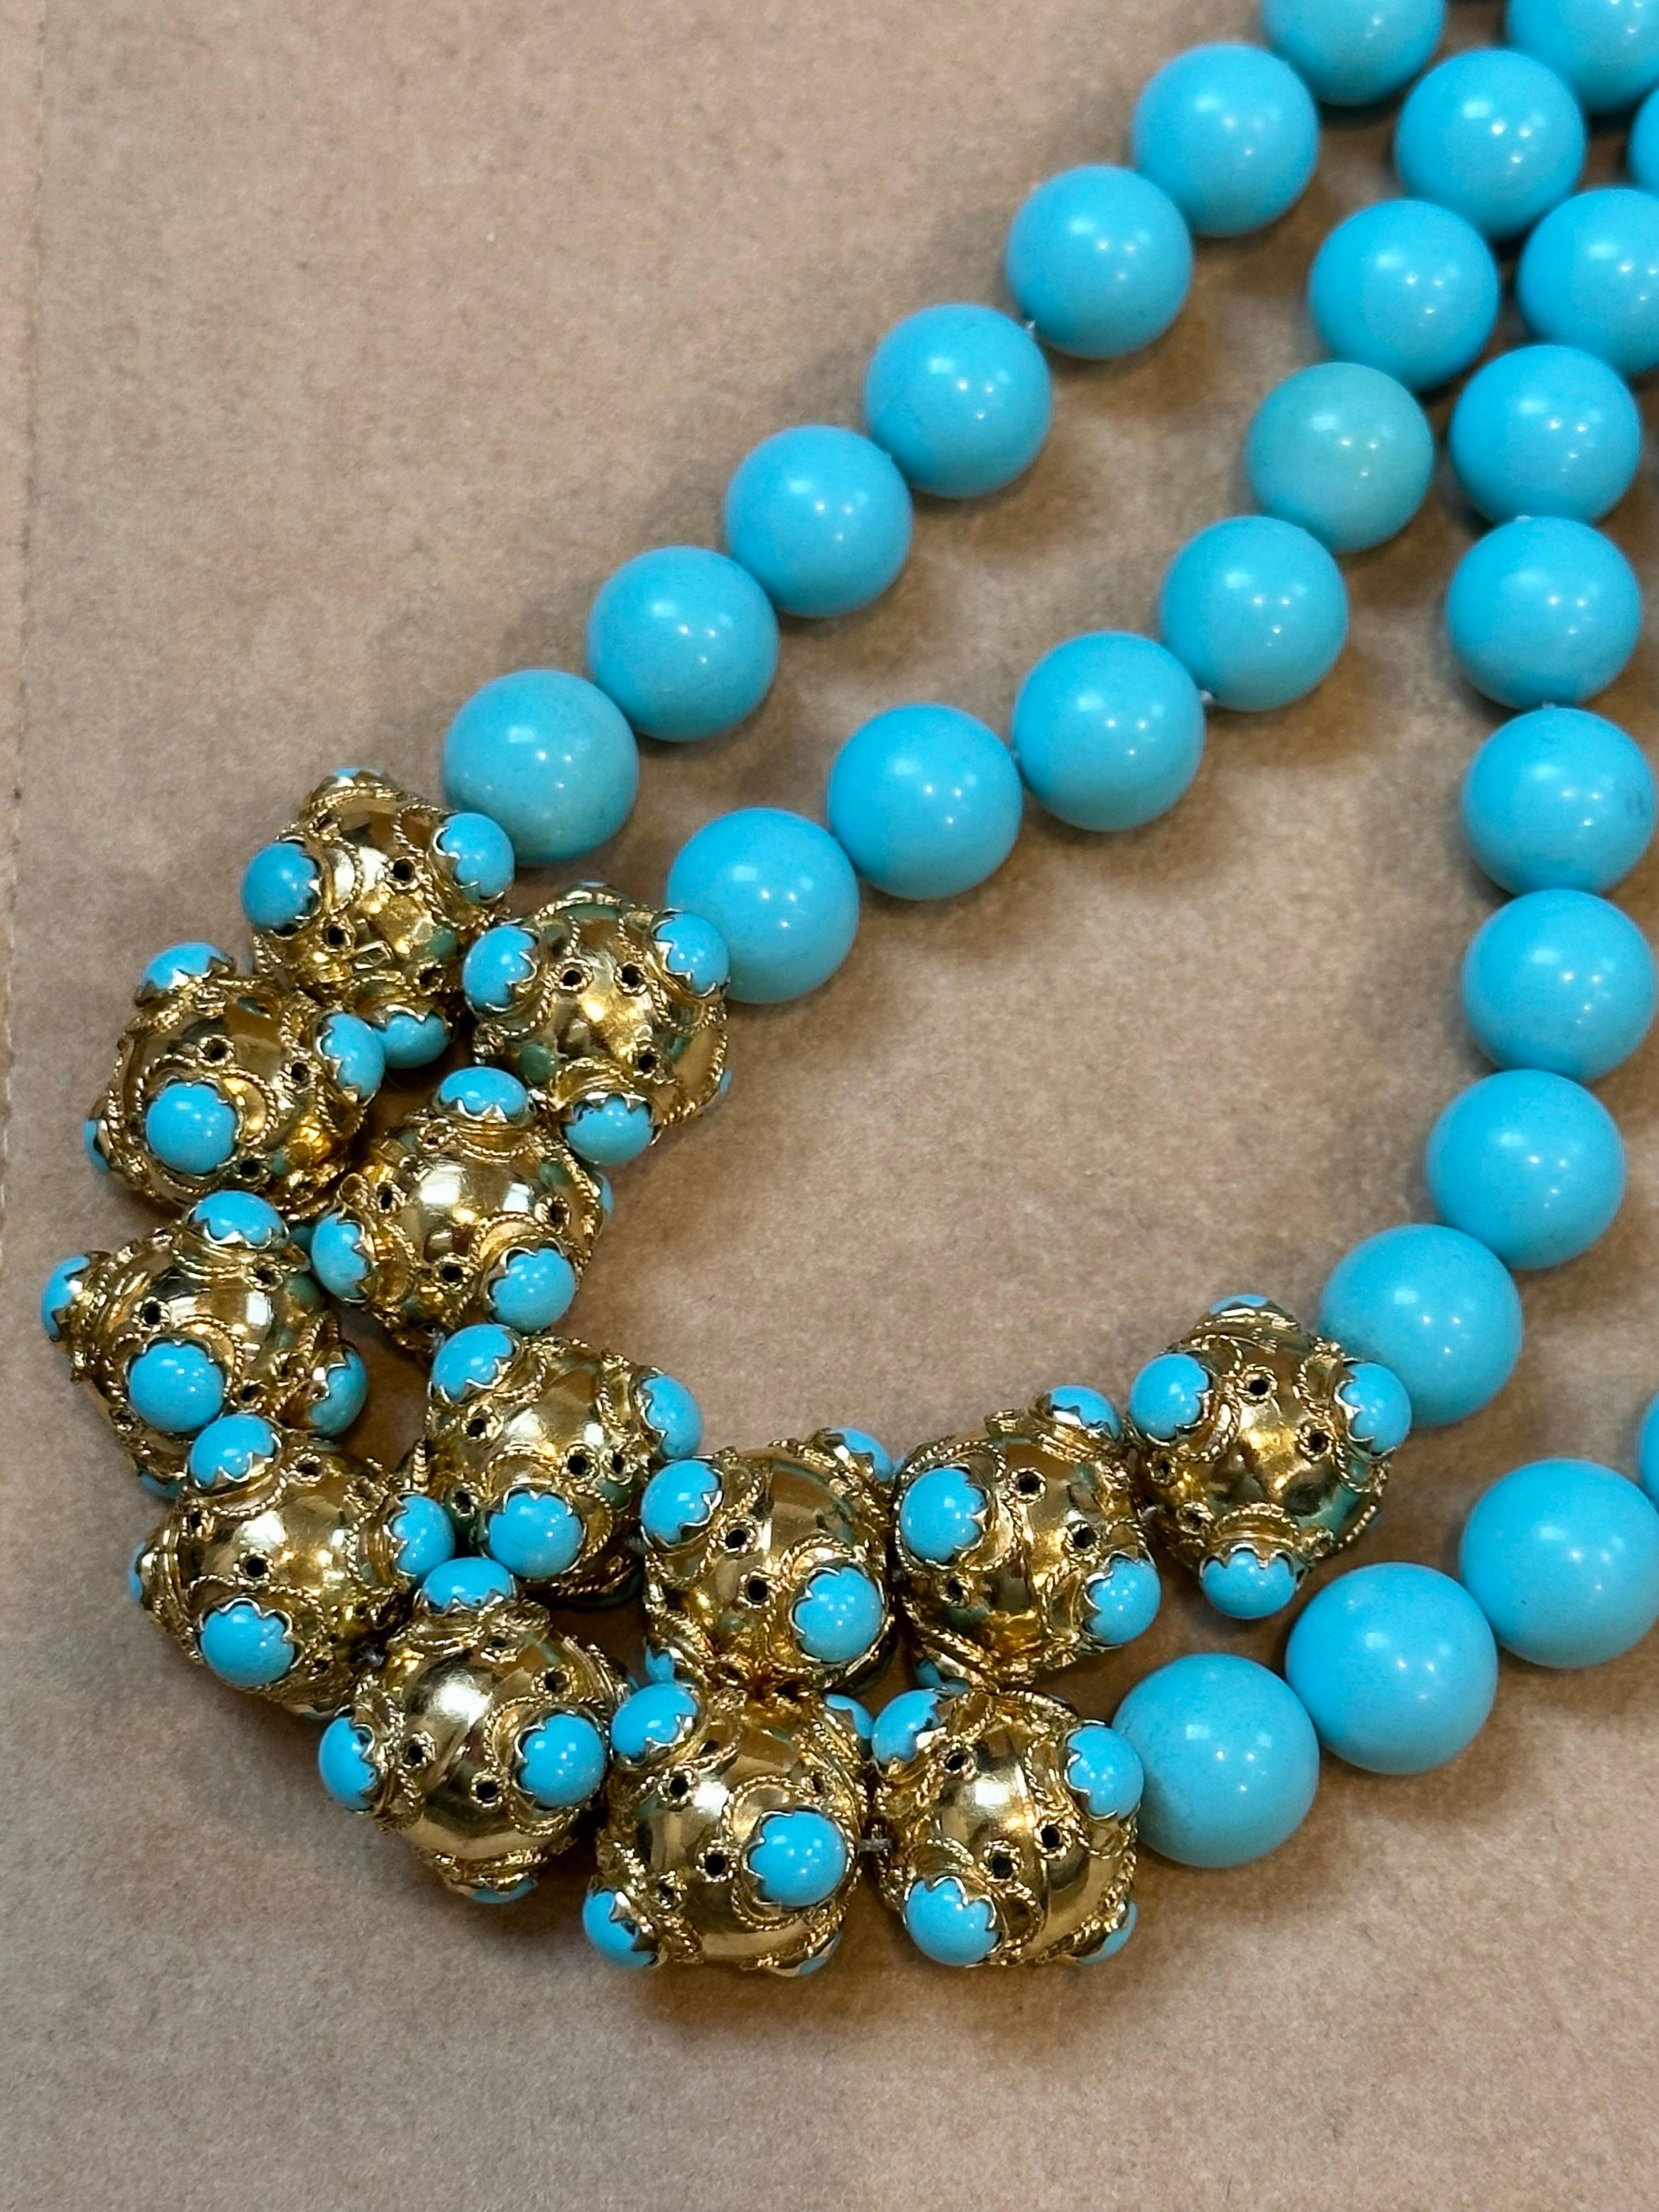 Vintage 600 Ct Natural Sleeping Beauty Turquoise Necklace, Two Strand 18 Kt Gold 2